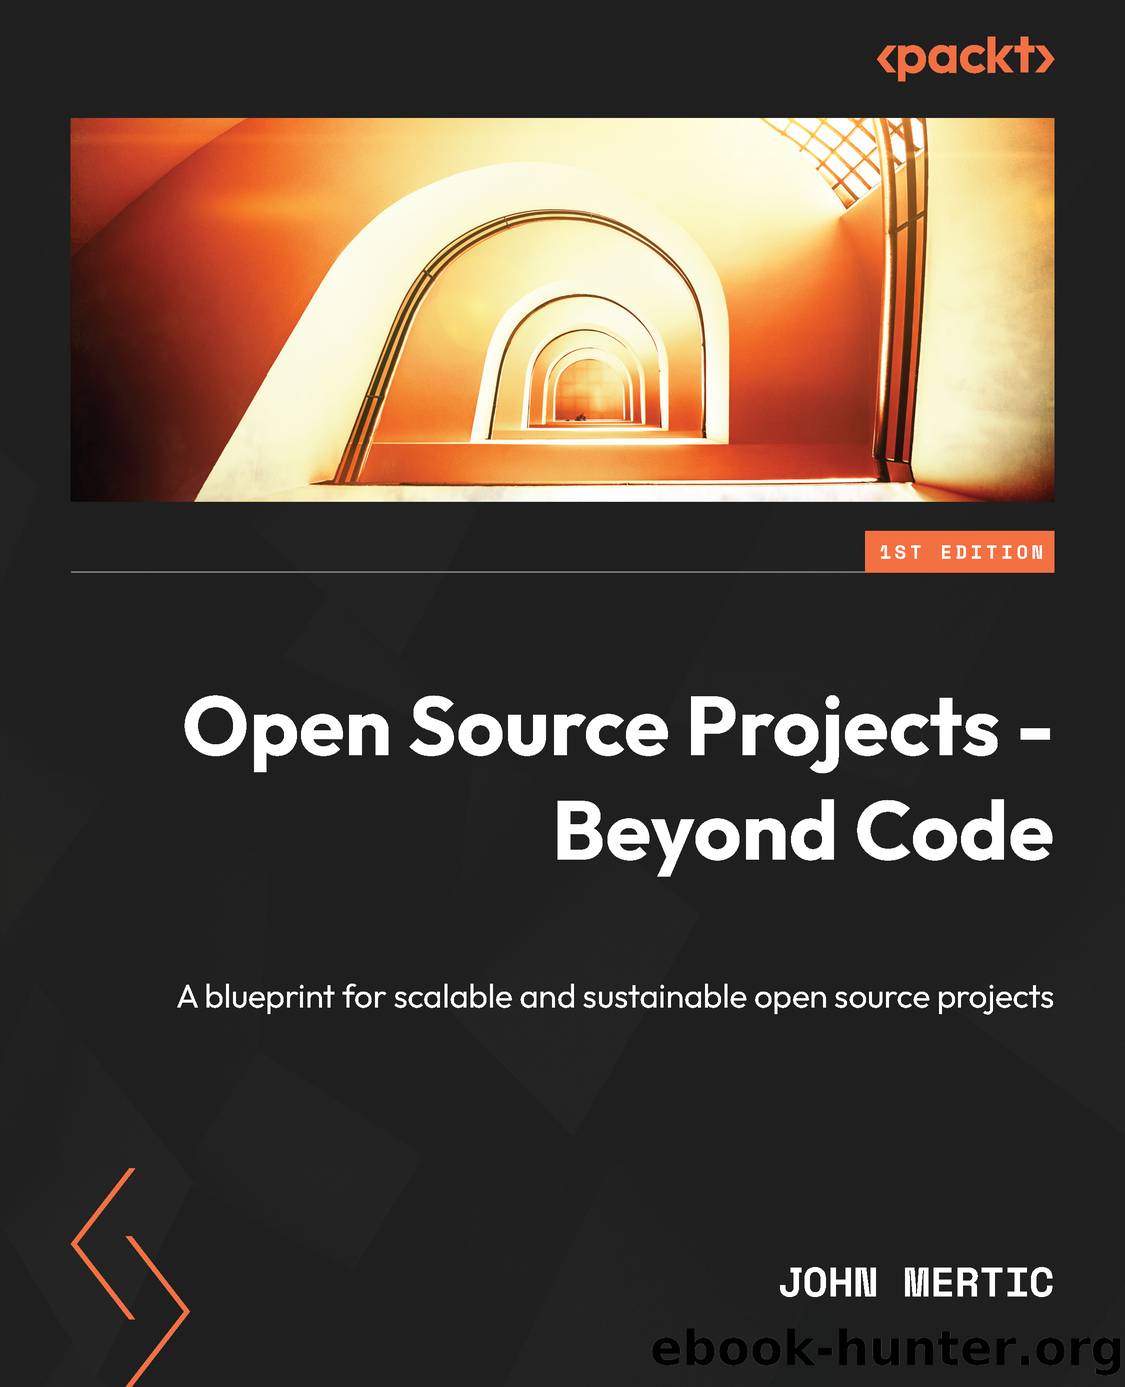 Open Source Projects - Beyond Code by John Mertic